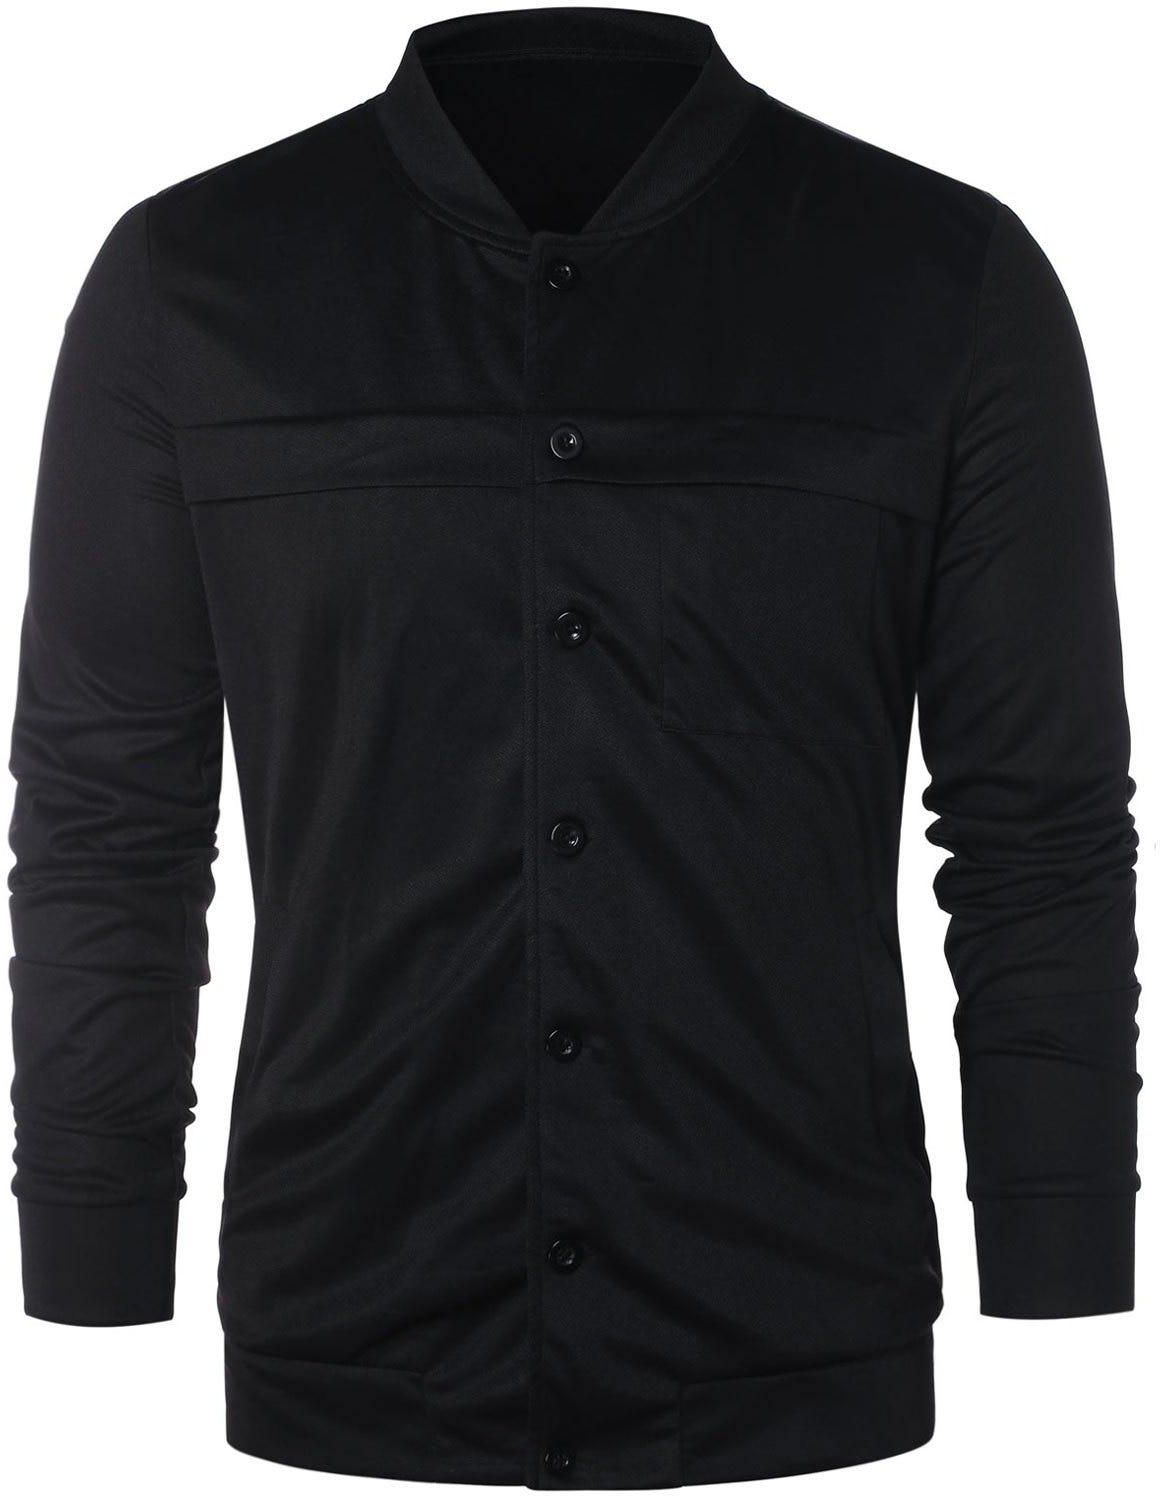 Stand Collar Button Up Solid Jacket - L